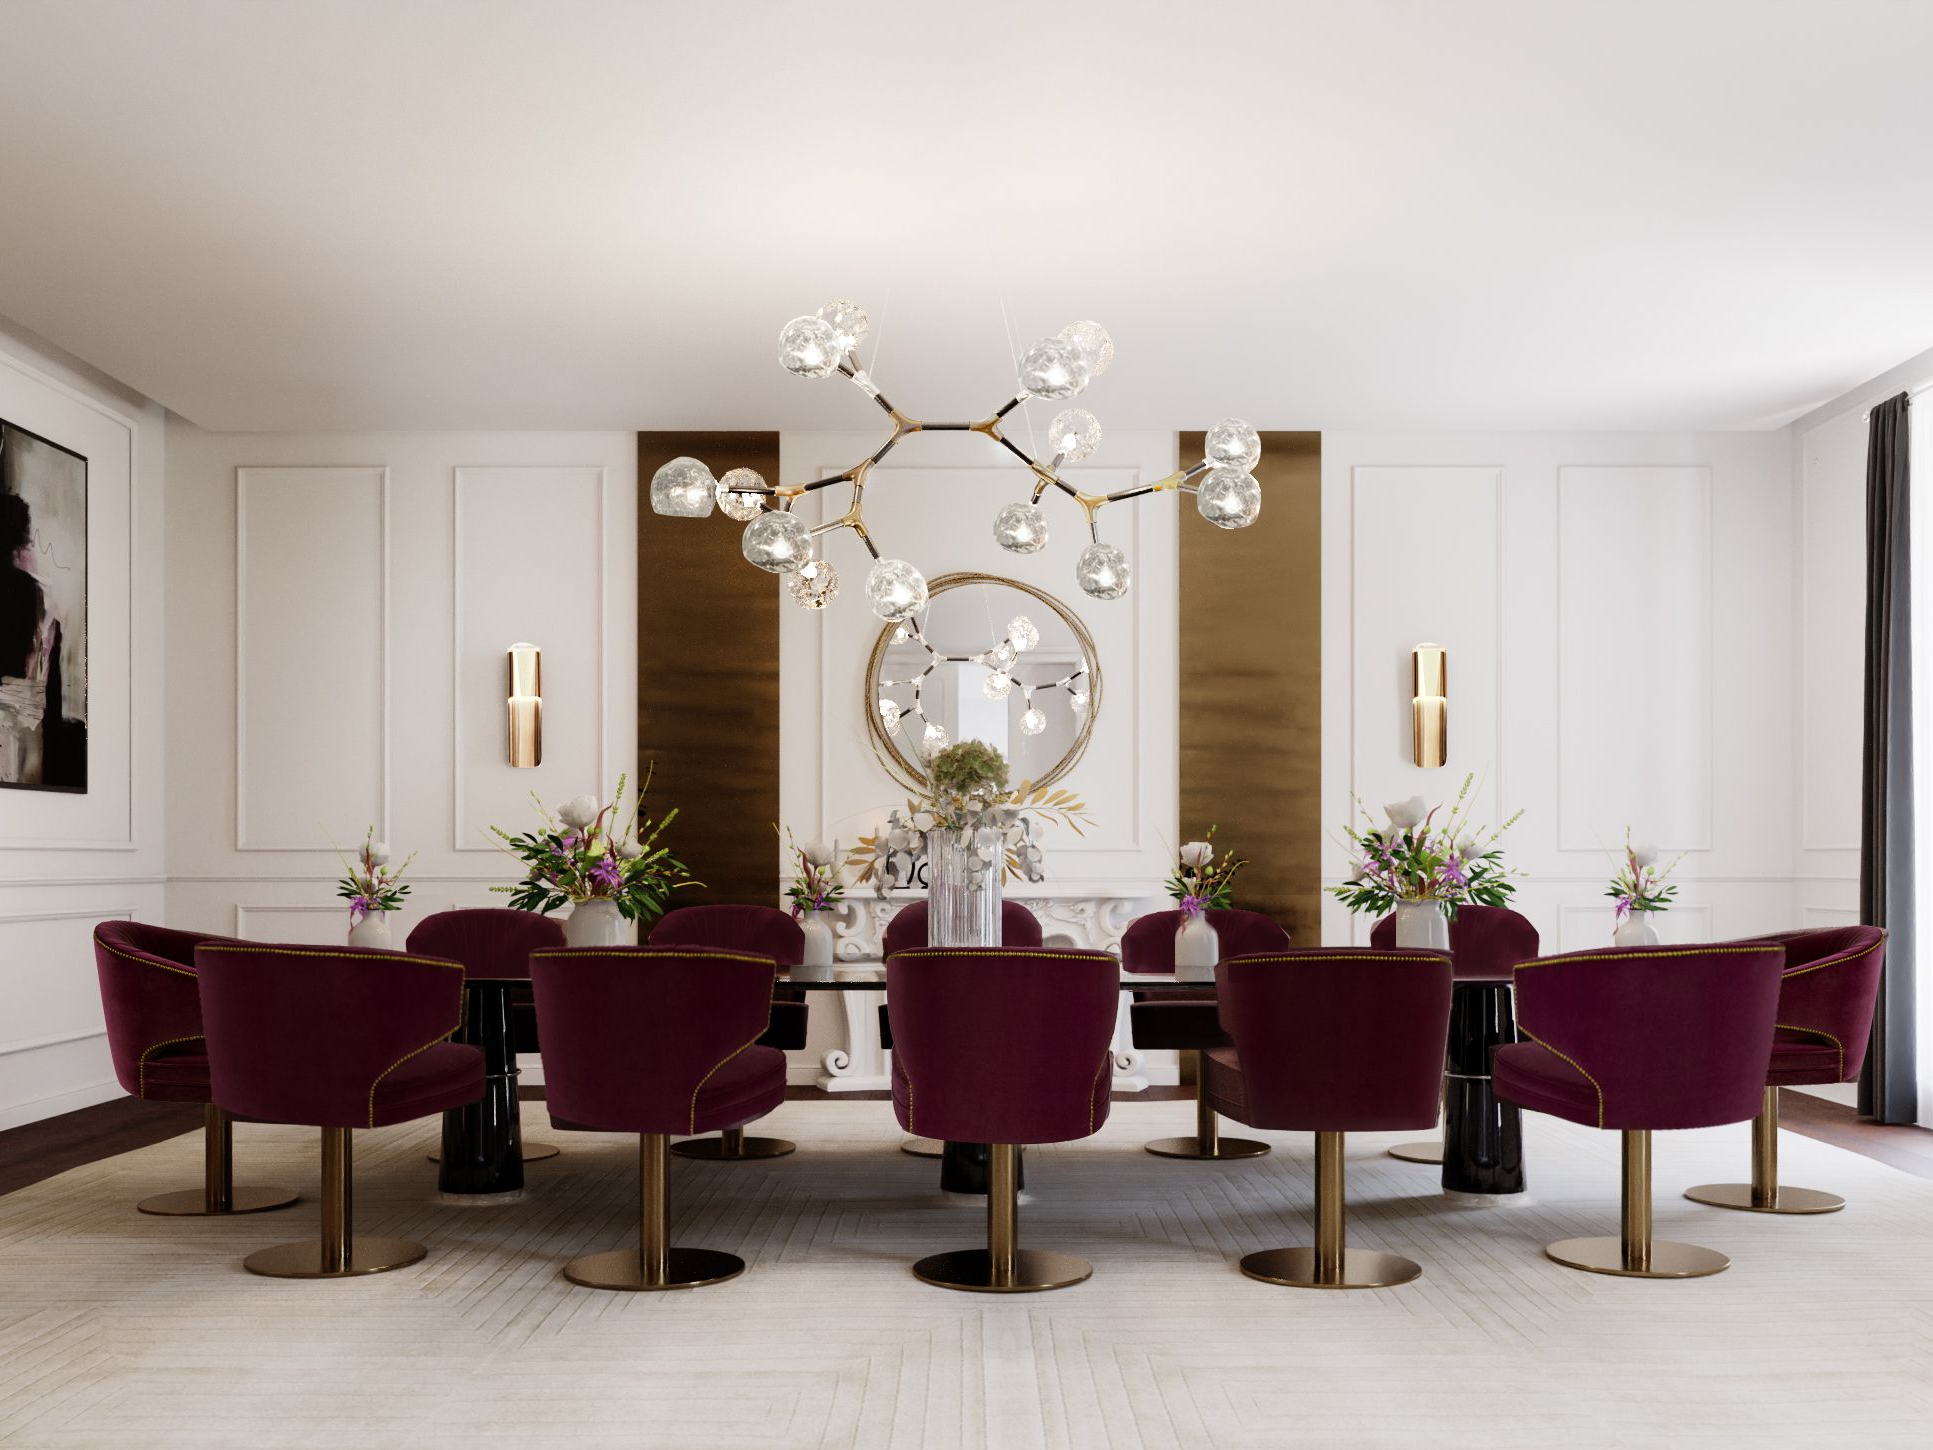 Elegant Dining Room Design With Transparent Acrylic Shades - Home'Society